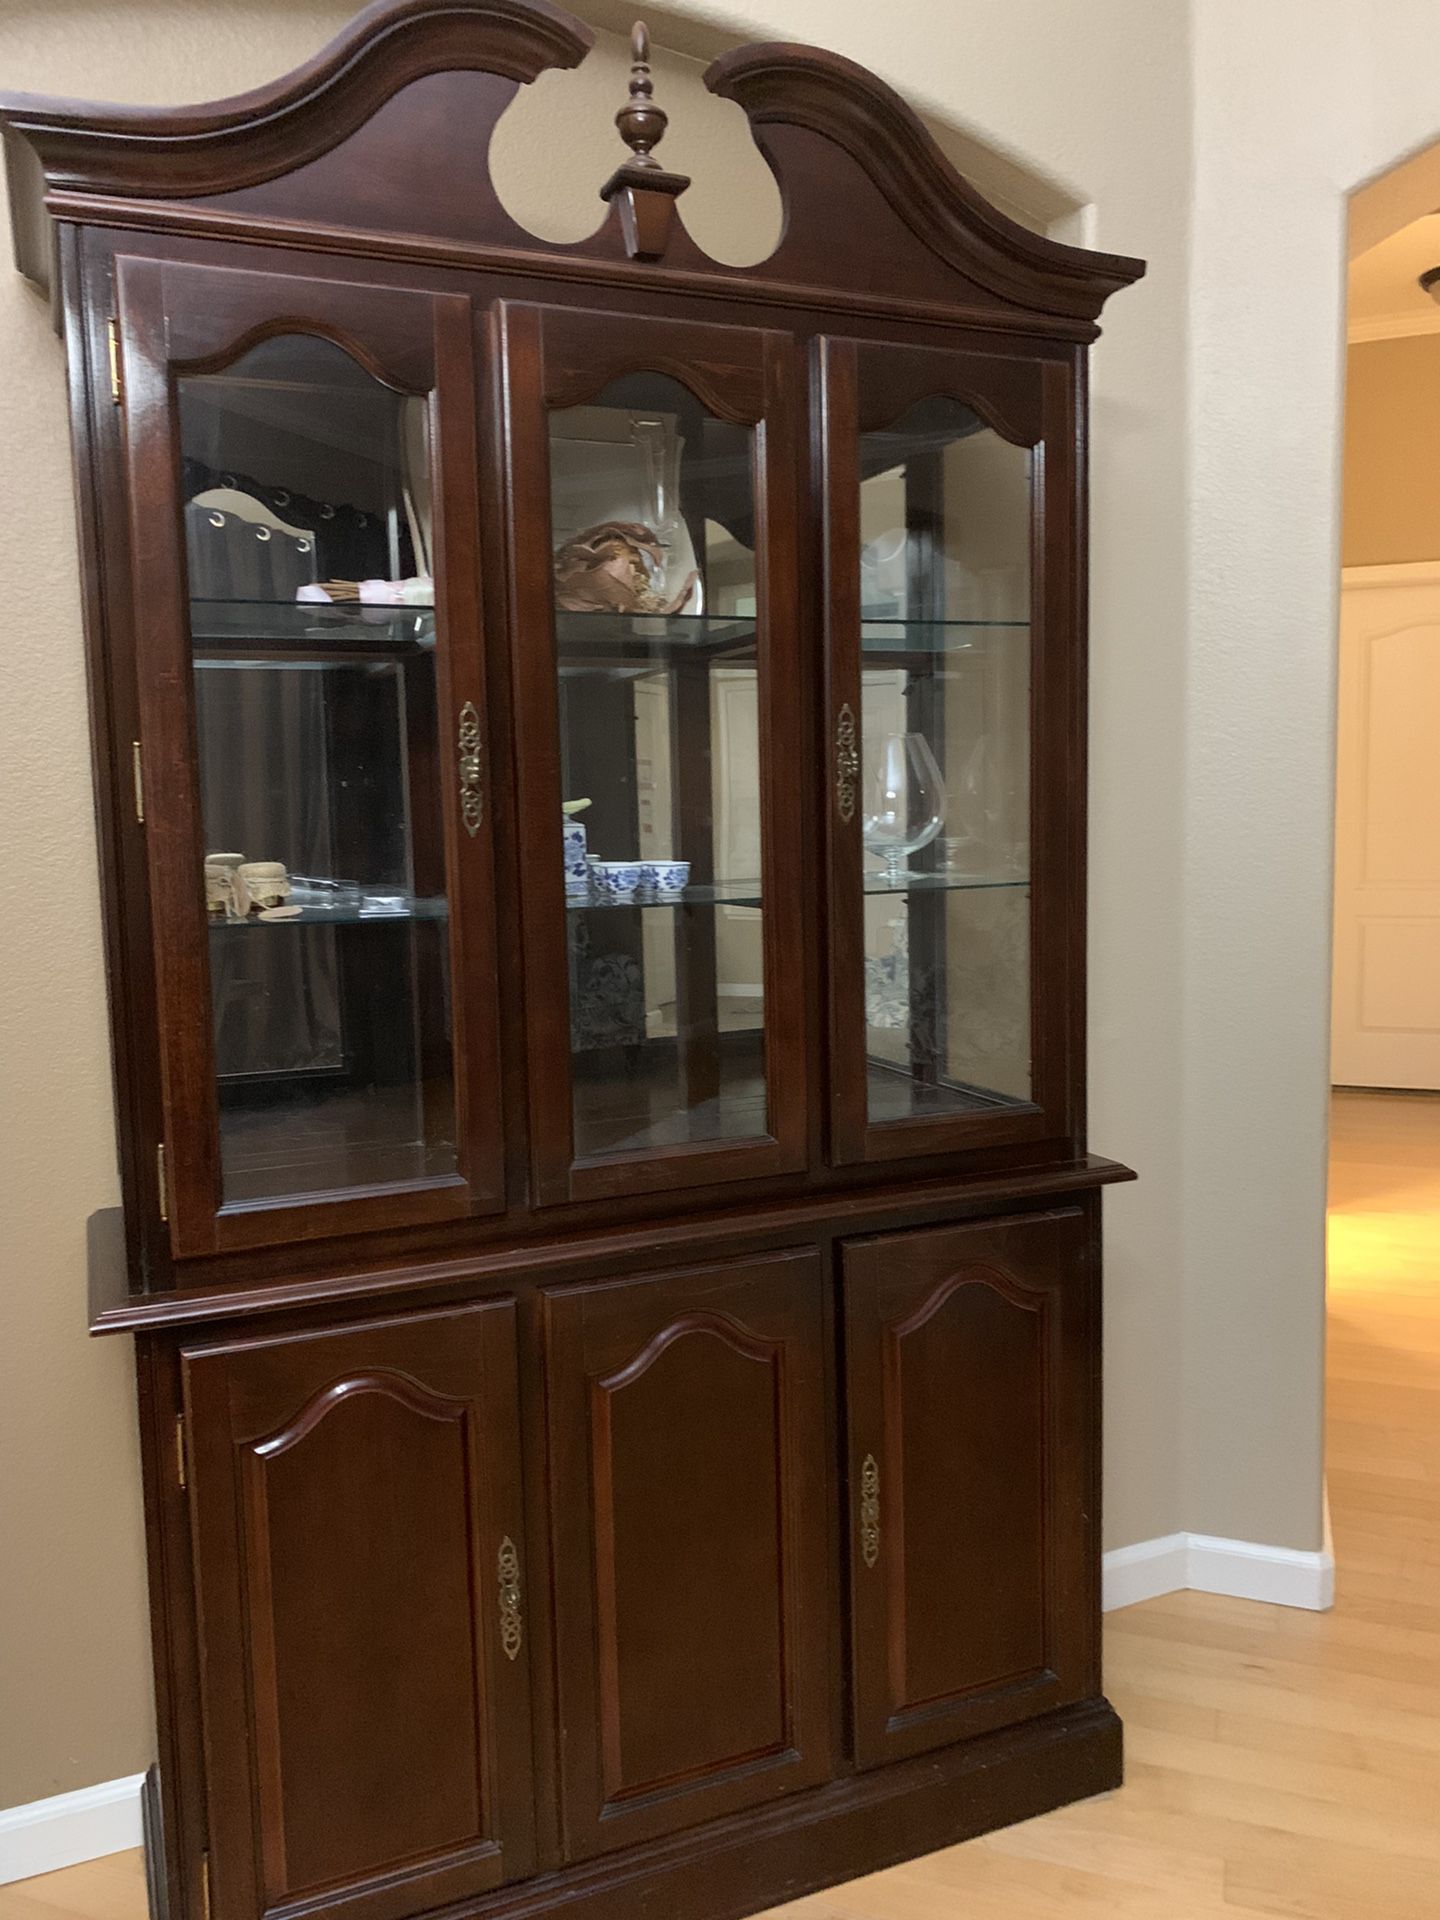 China Cabinet - Height is 80 inches and width is 47 inches 